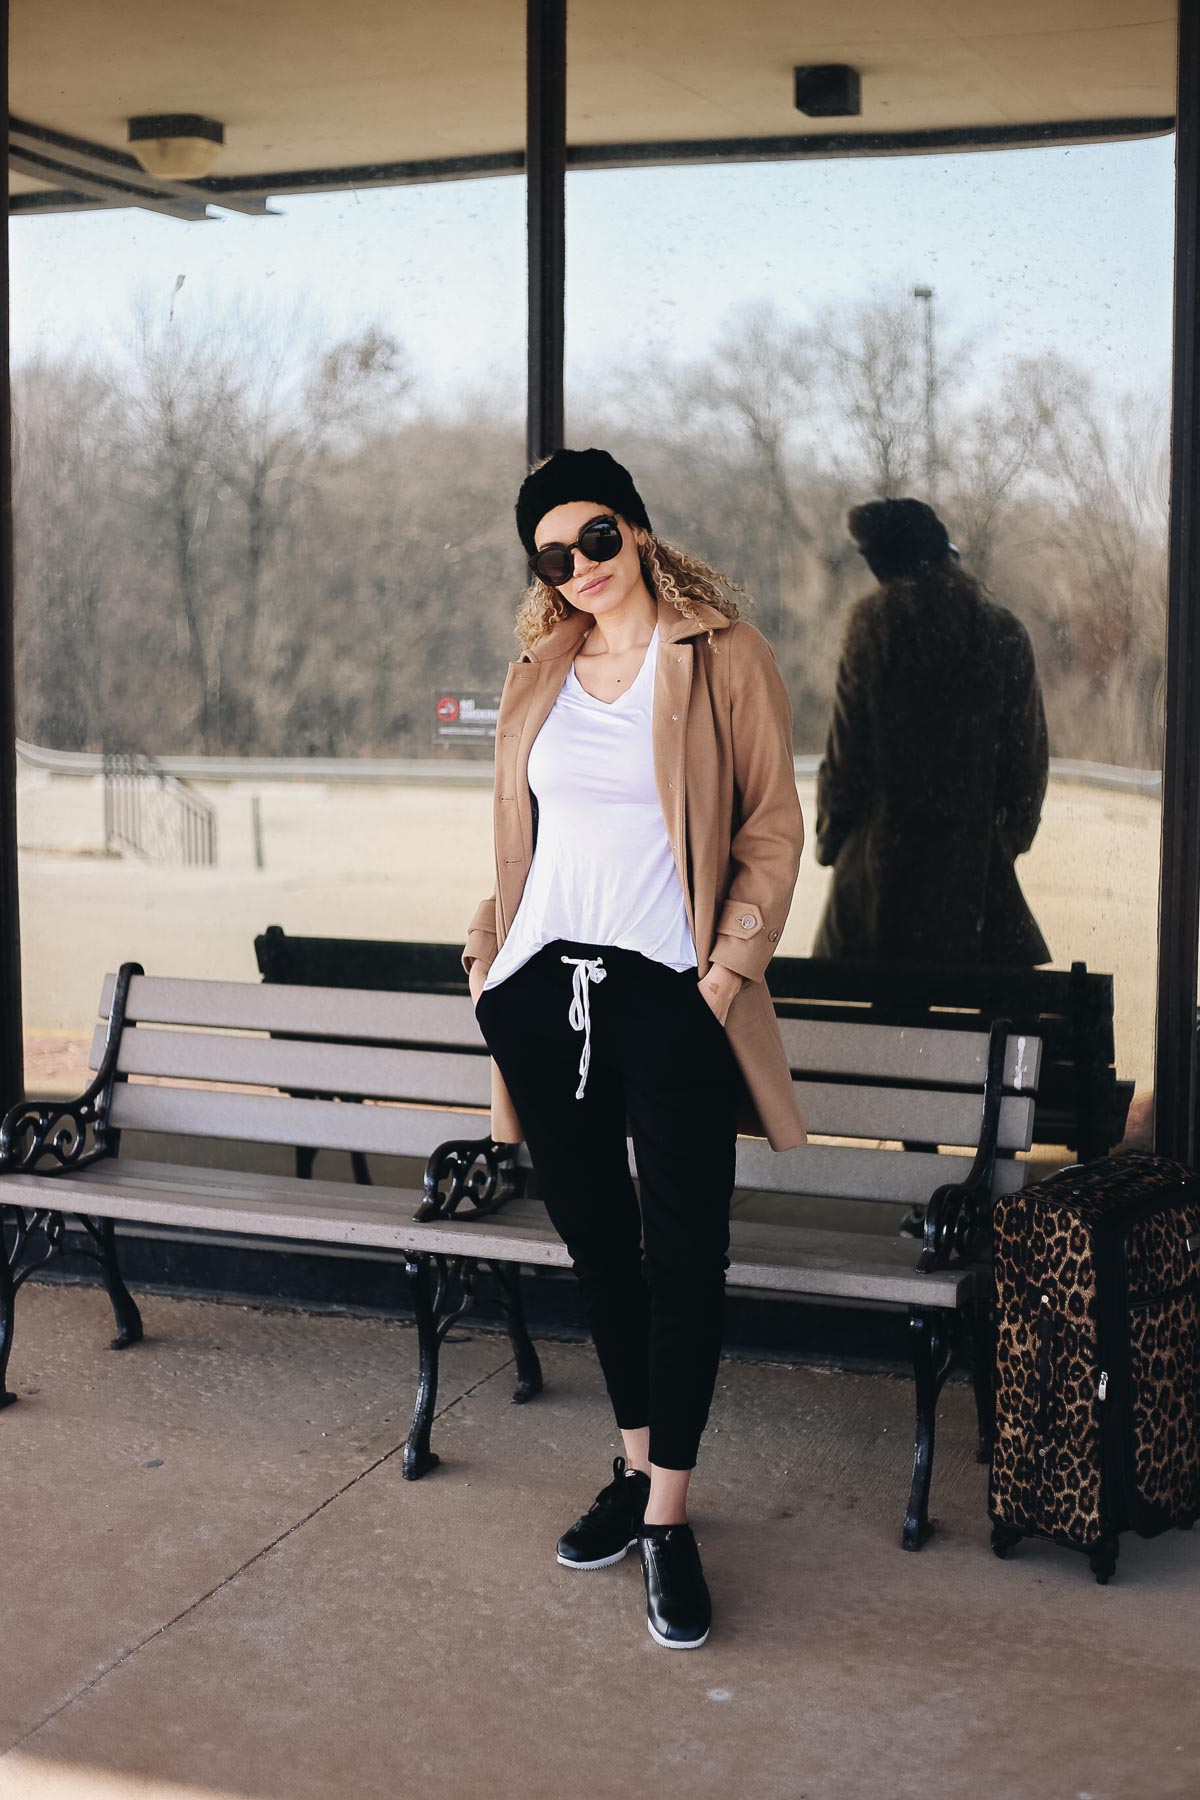 comfy airport outfit with joggers and a camel coat